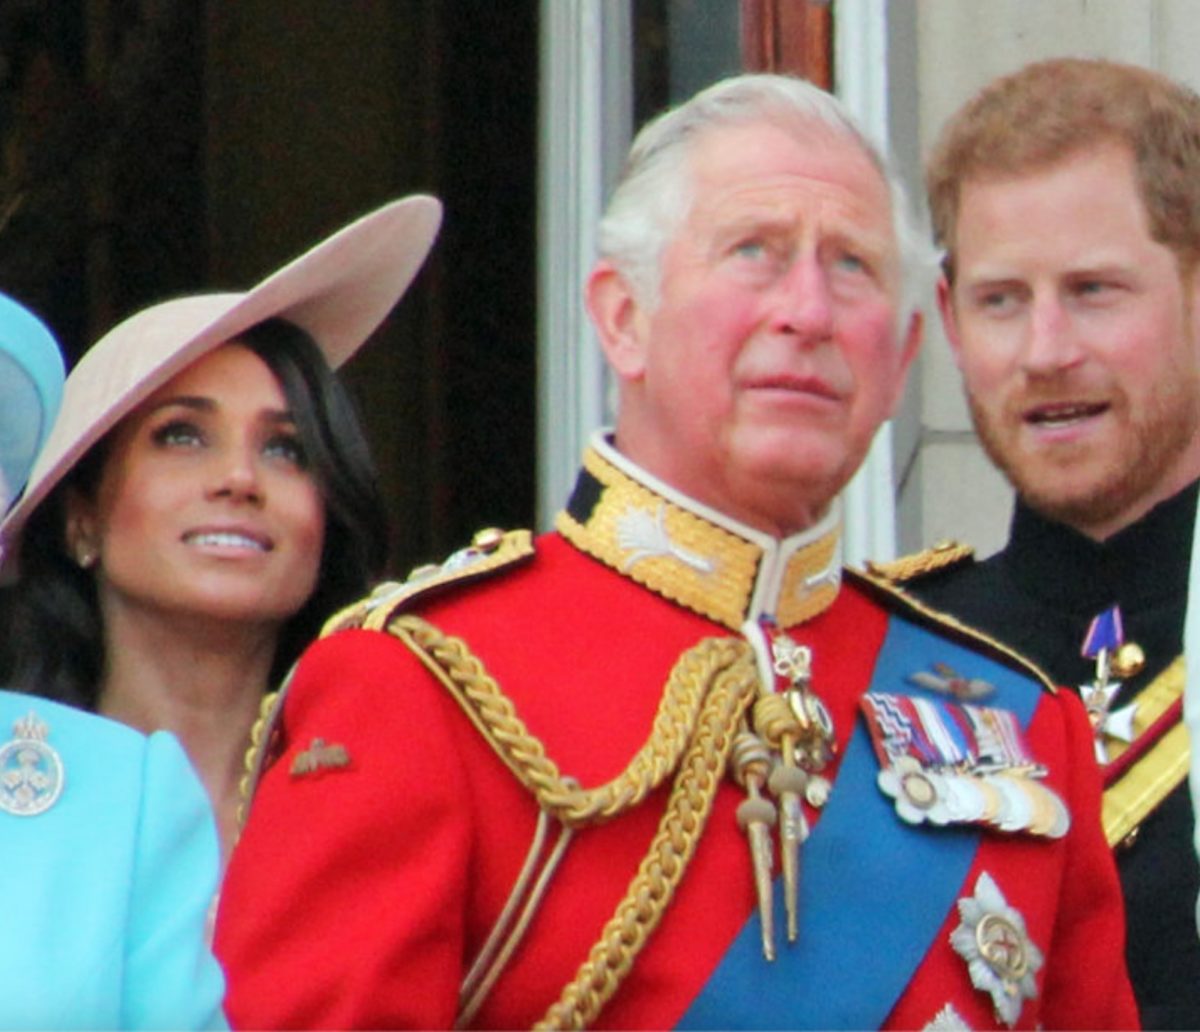 Prince Harry and Meghan Markle Reveal If They Will Attend King Charles' Coronation | Prince Harry and Meghan Markle have made their decision. As it has been widely reported, Prince Harry’s father, King Charles is set to celebrate his coronation on May 6th.